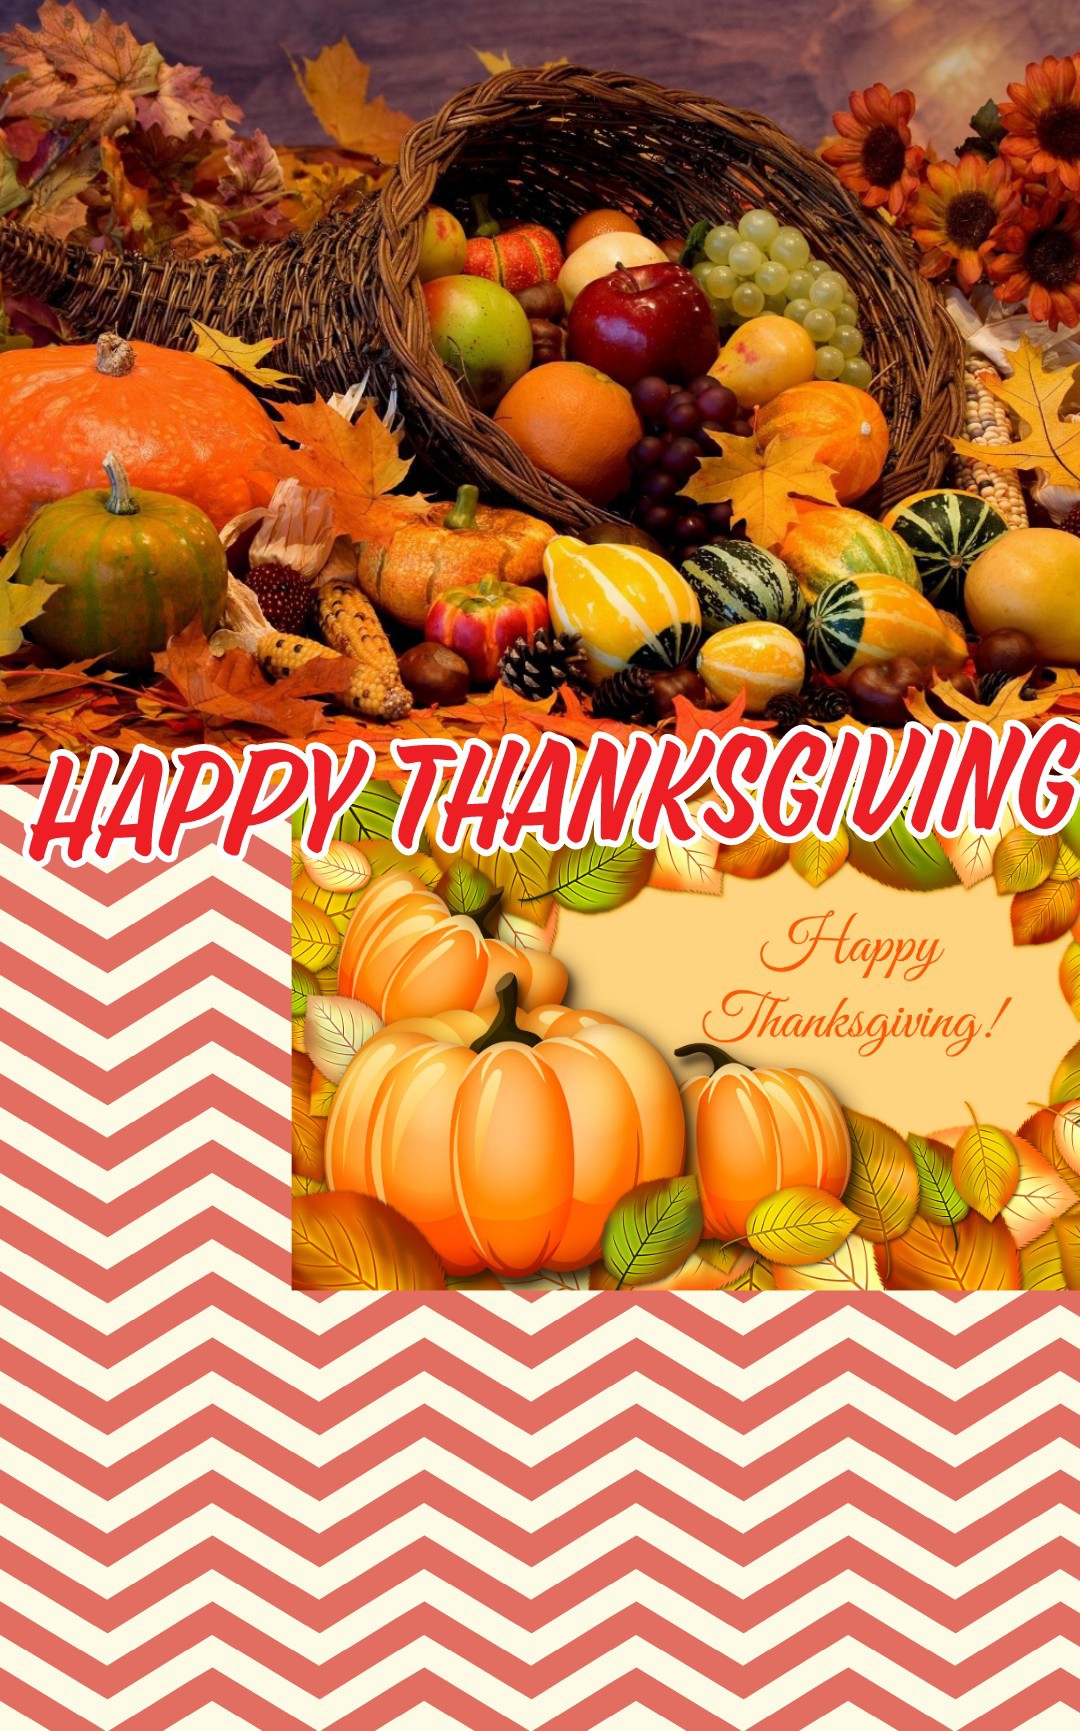 Happy Thanksgiving 
to all 
and thanks to you follow for a follow